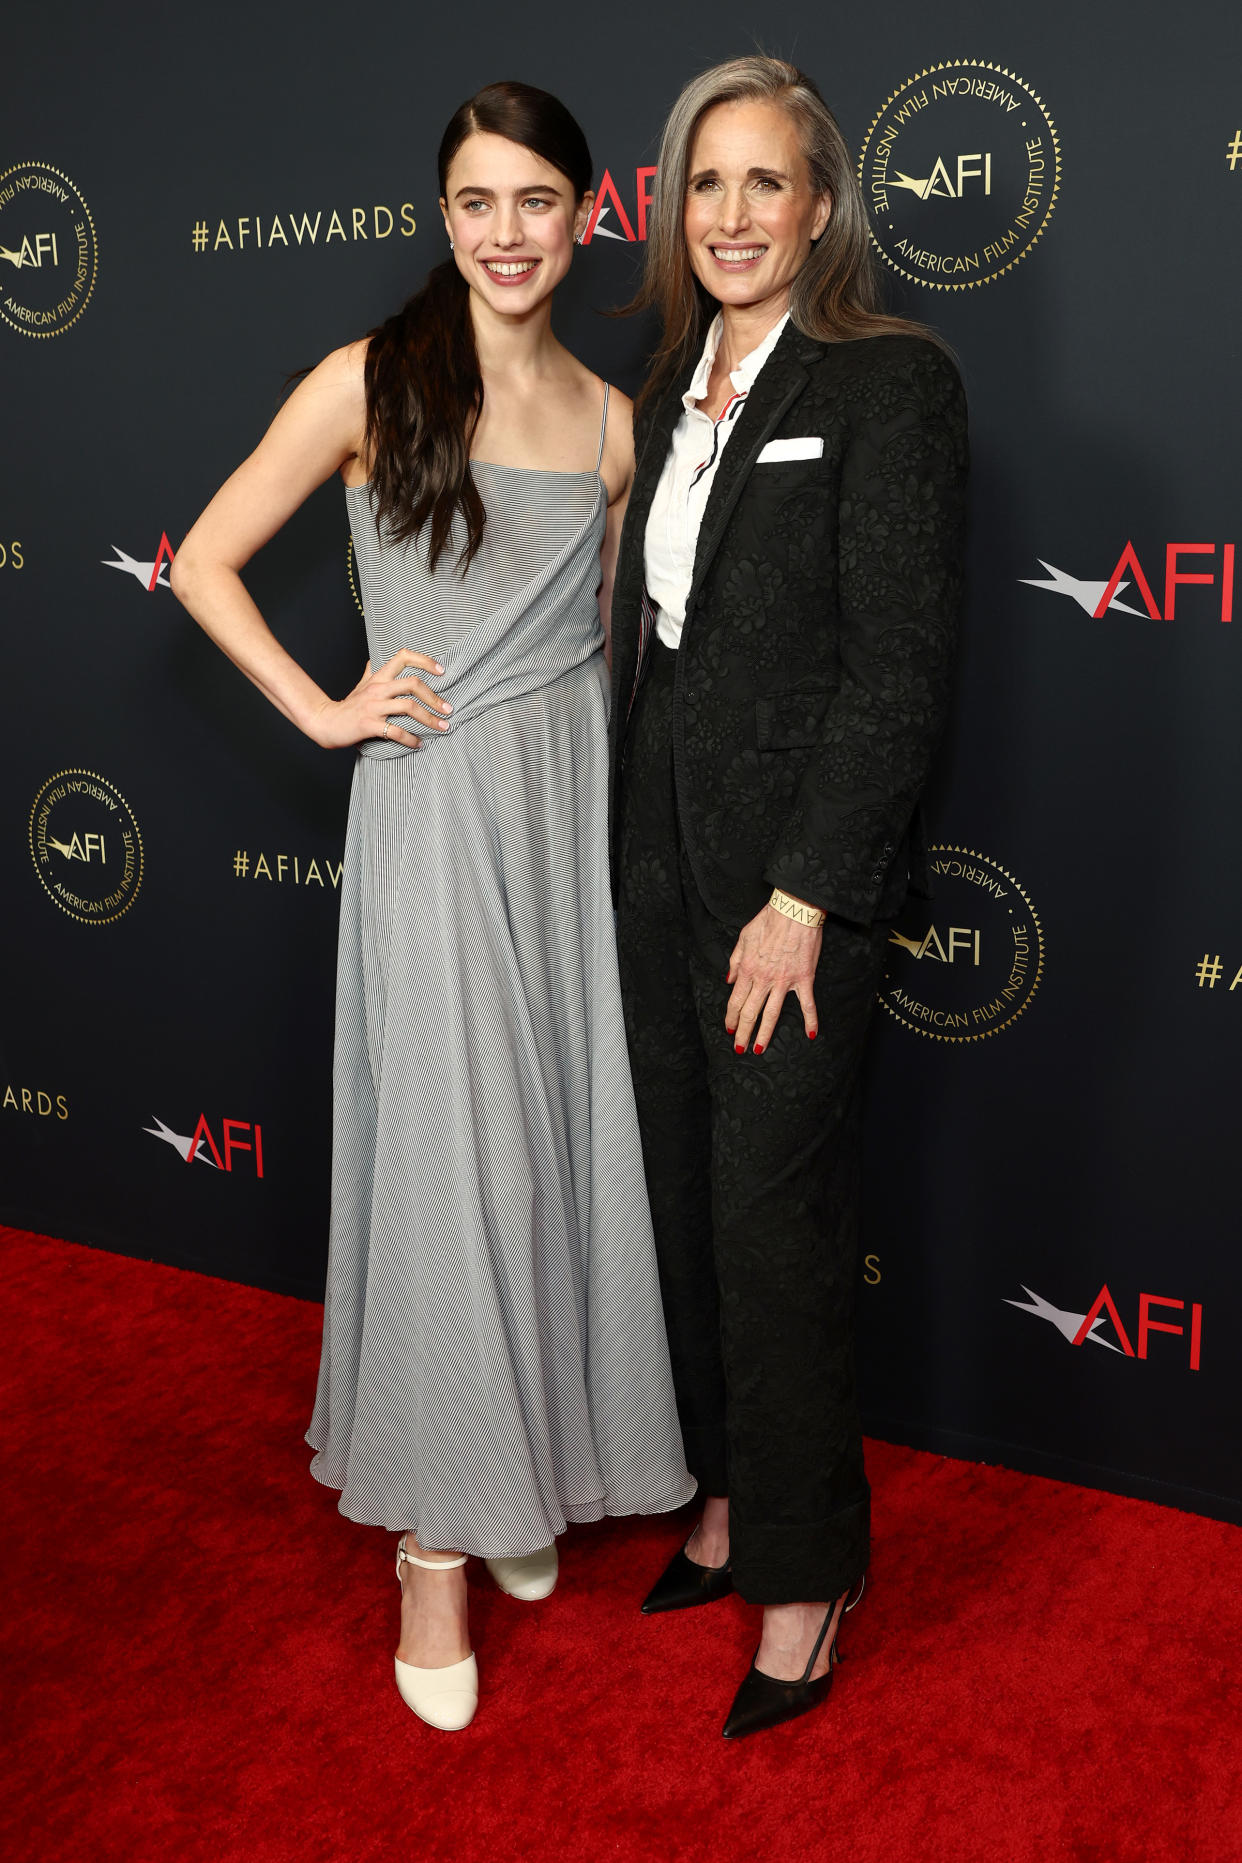 AFI Awards Luncheon - Arrivals (Emma McIntyre / Getty Images)